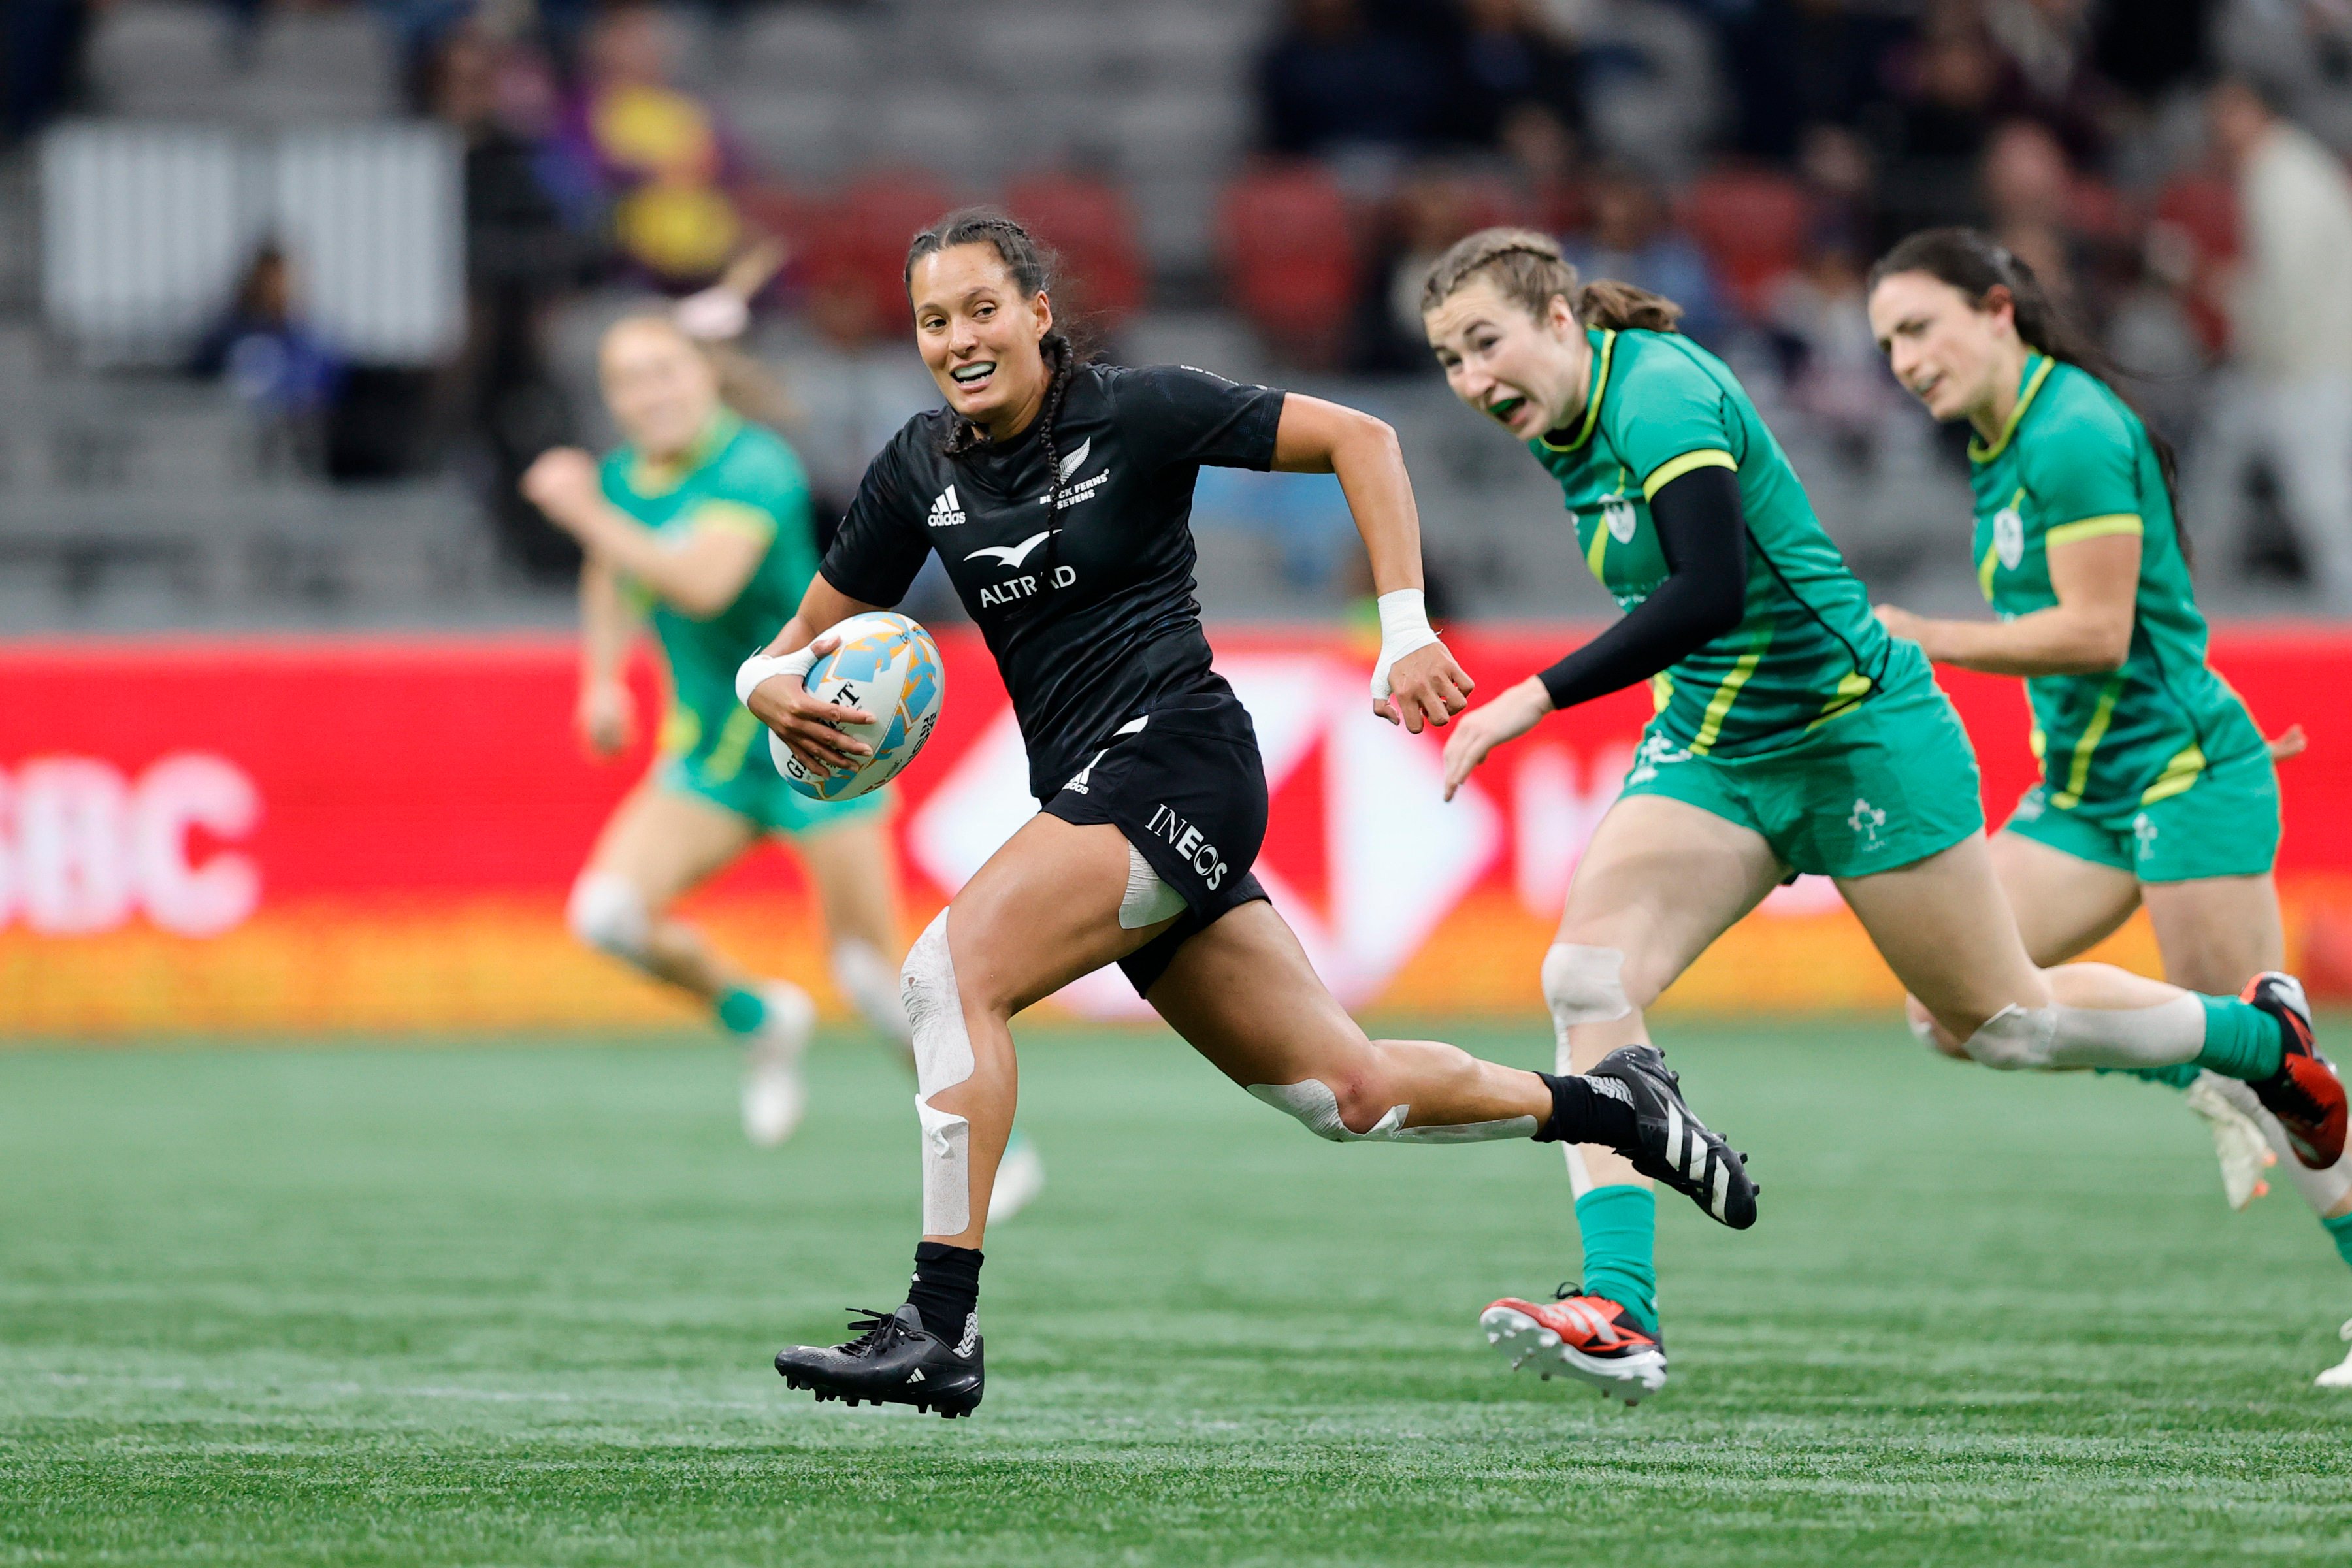 Tyla King has won almost everything available in a career that started when she was an 18-year-old in 2012, including Olympic gold and silver. Photo: World Rugby/Mike Lee